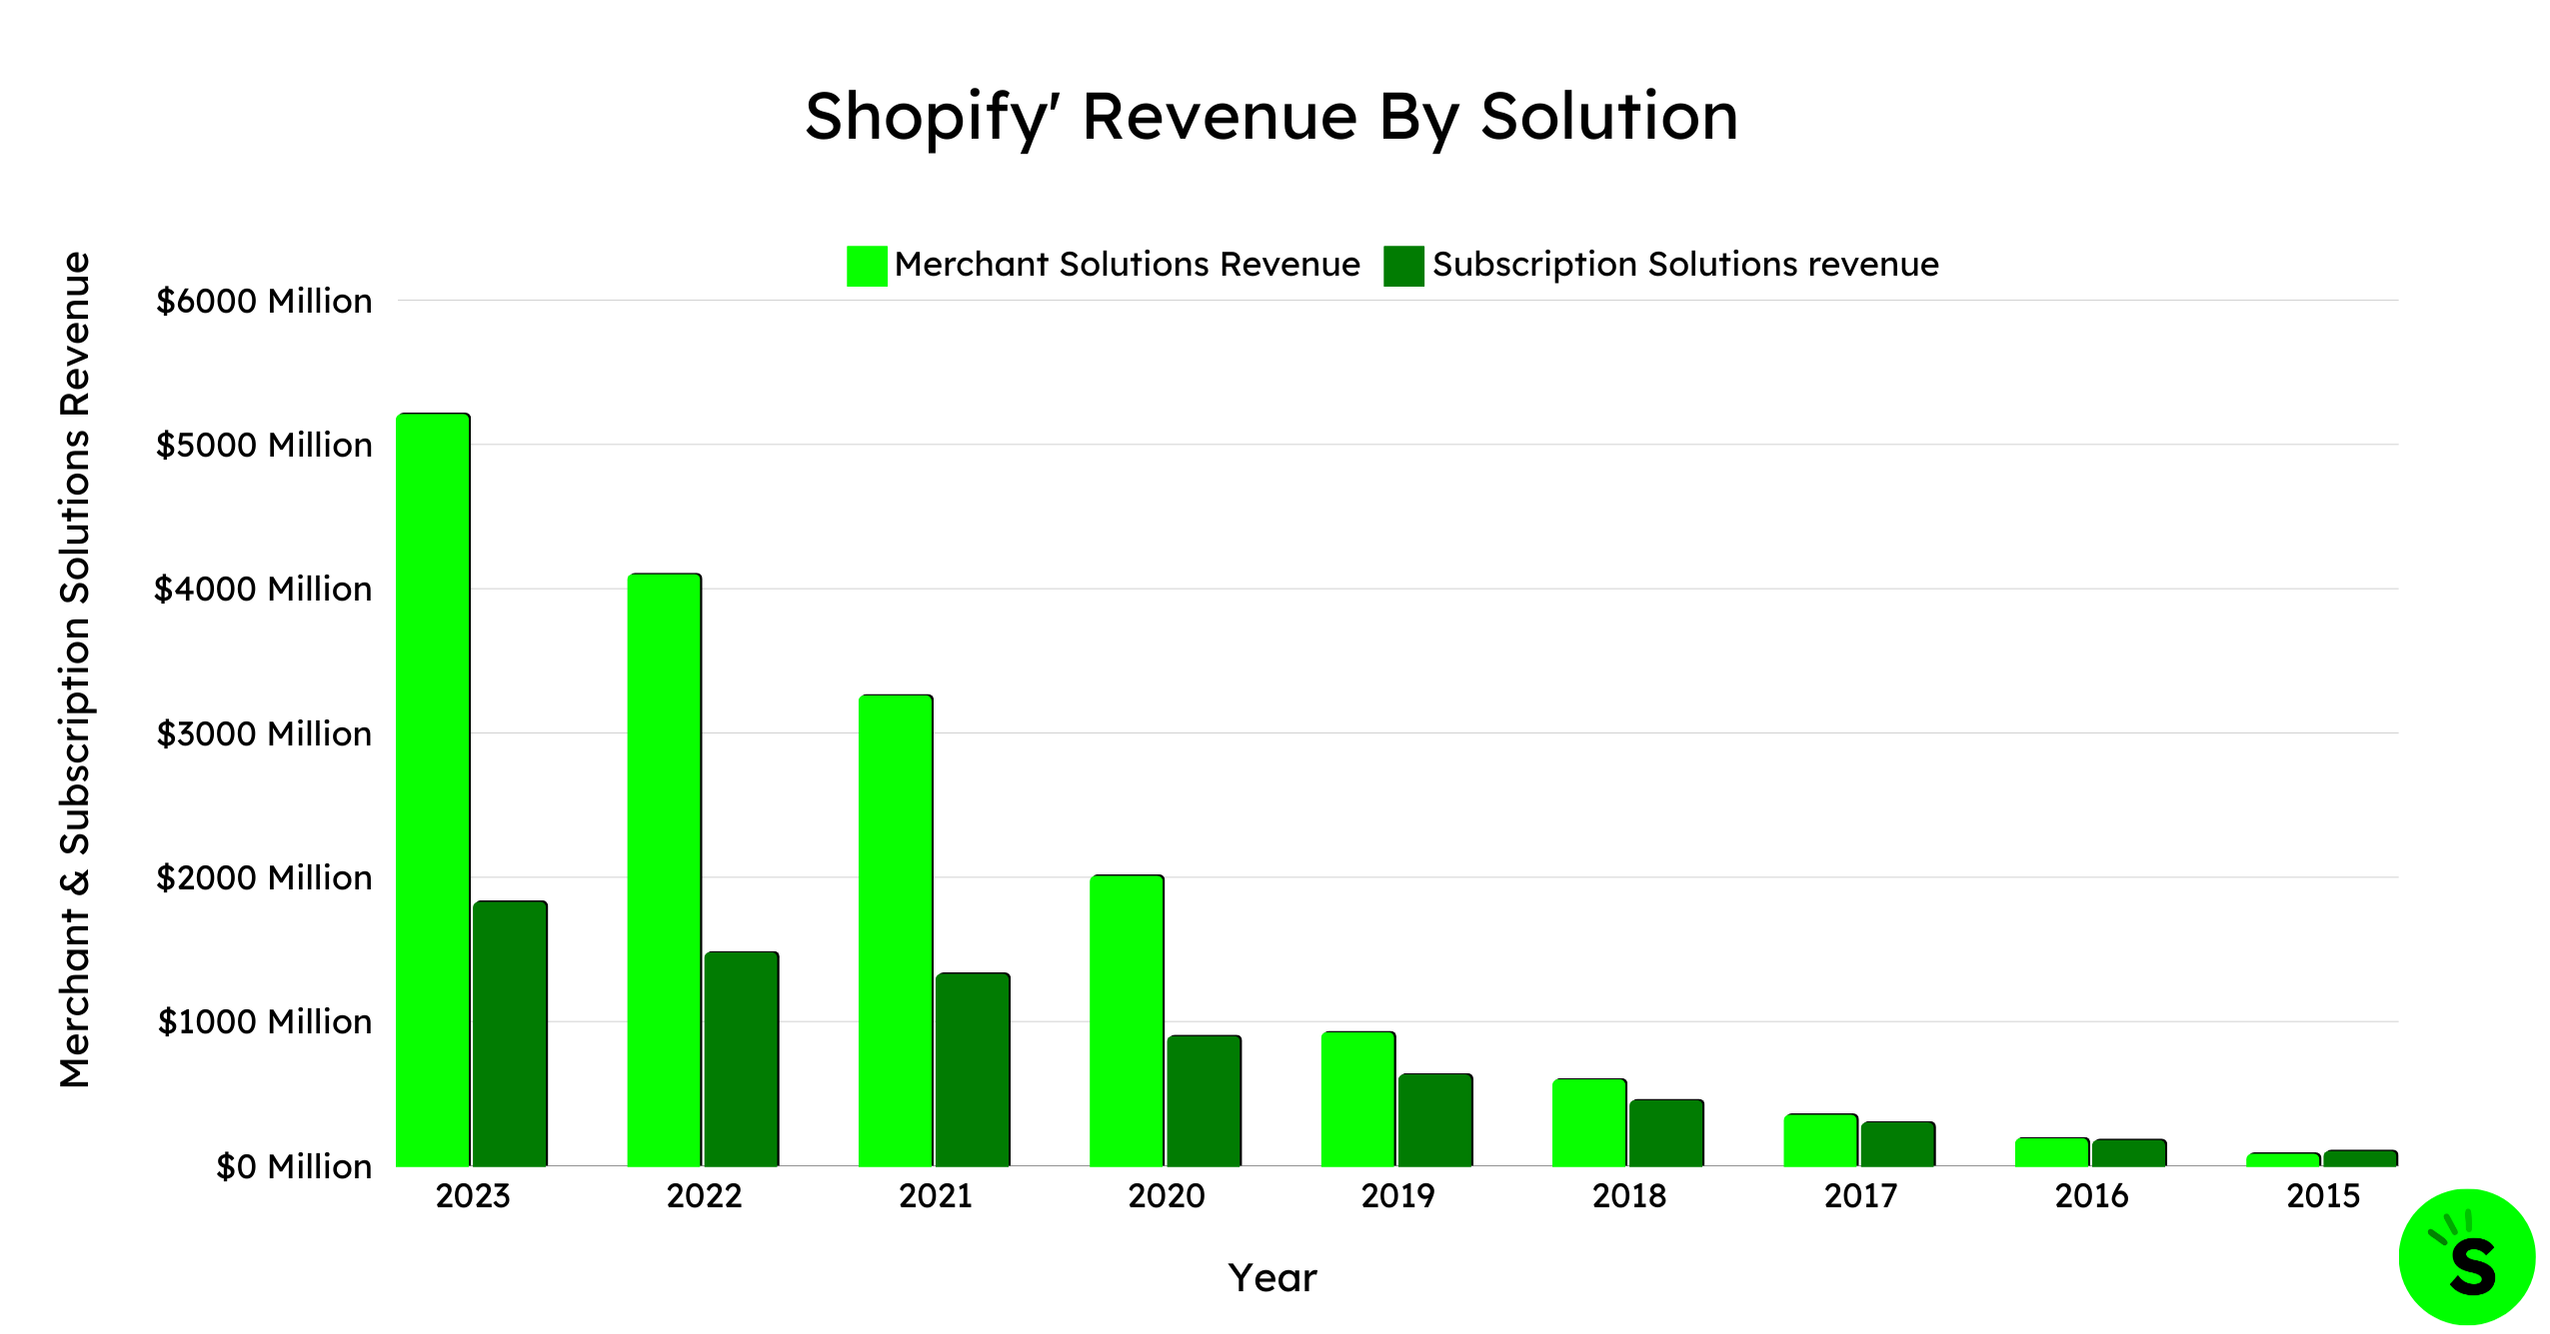 Shopify' Revenue By Solution